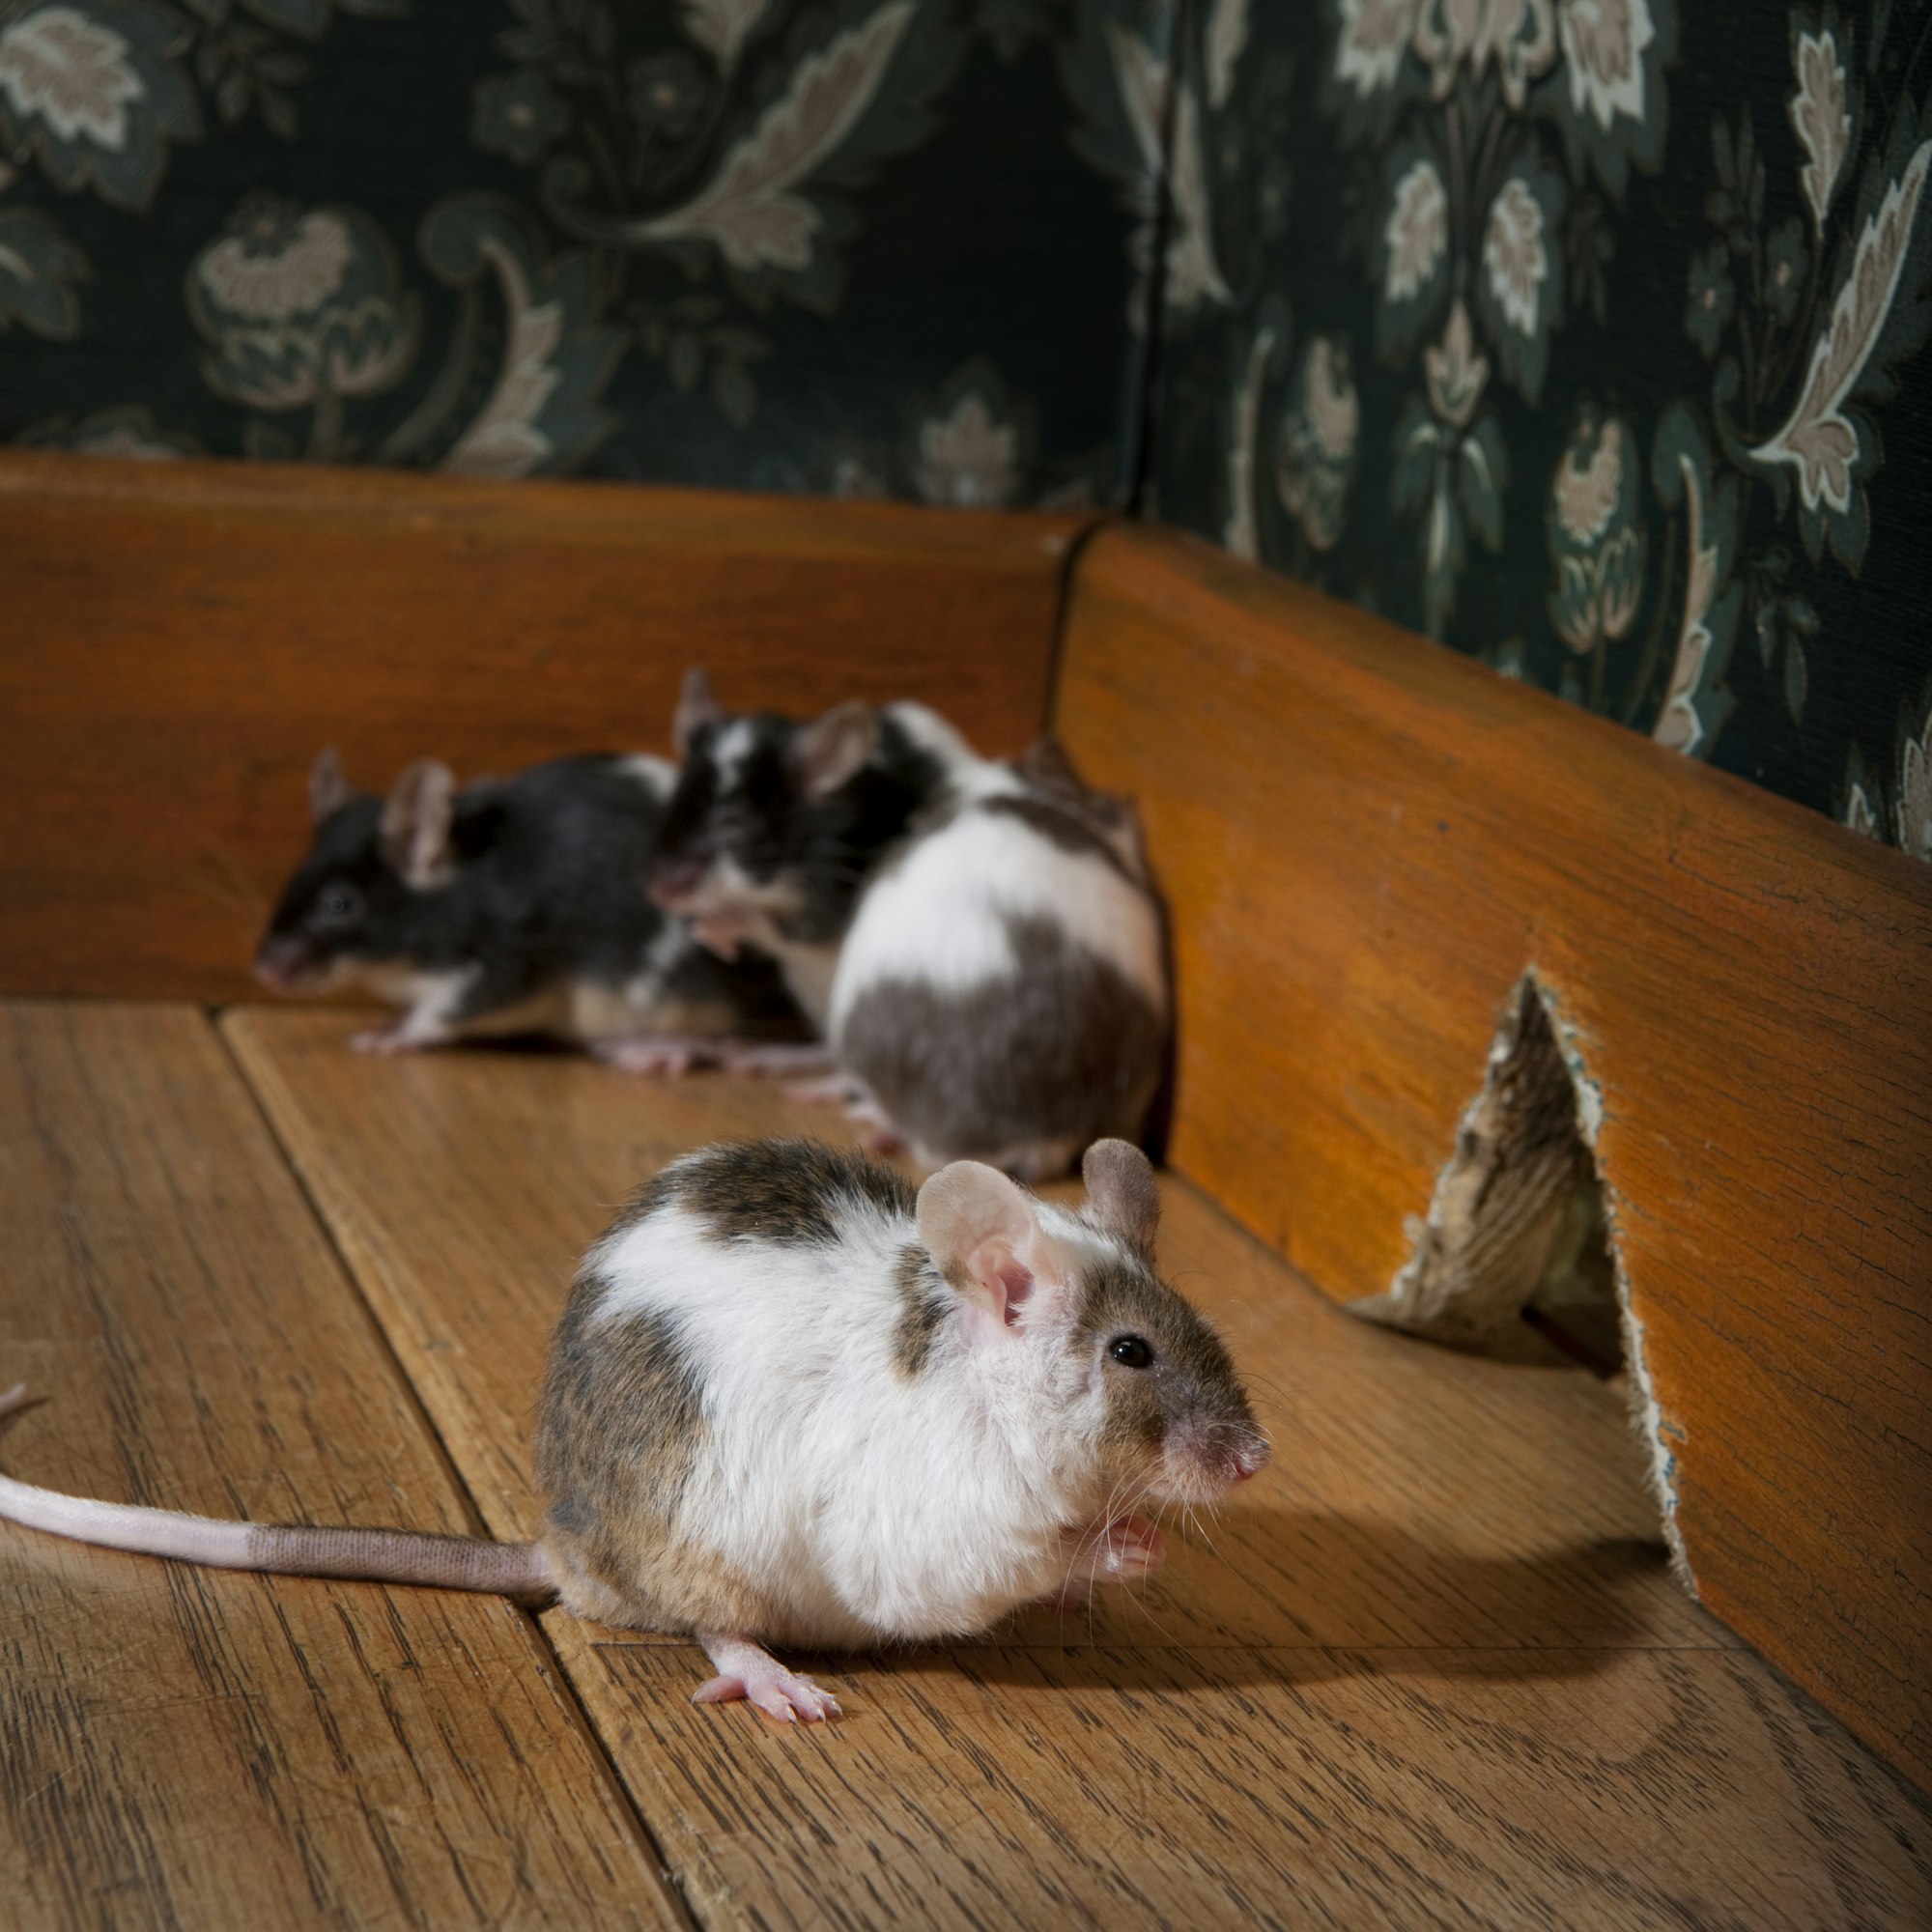 group of mice walking in a luxury old-fashioned room